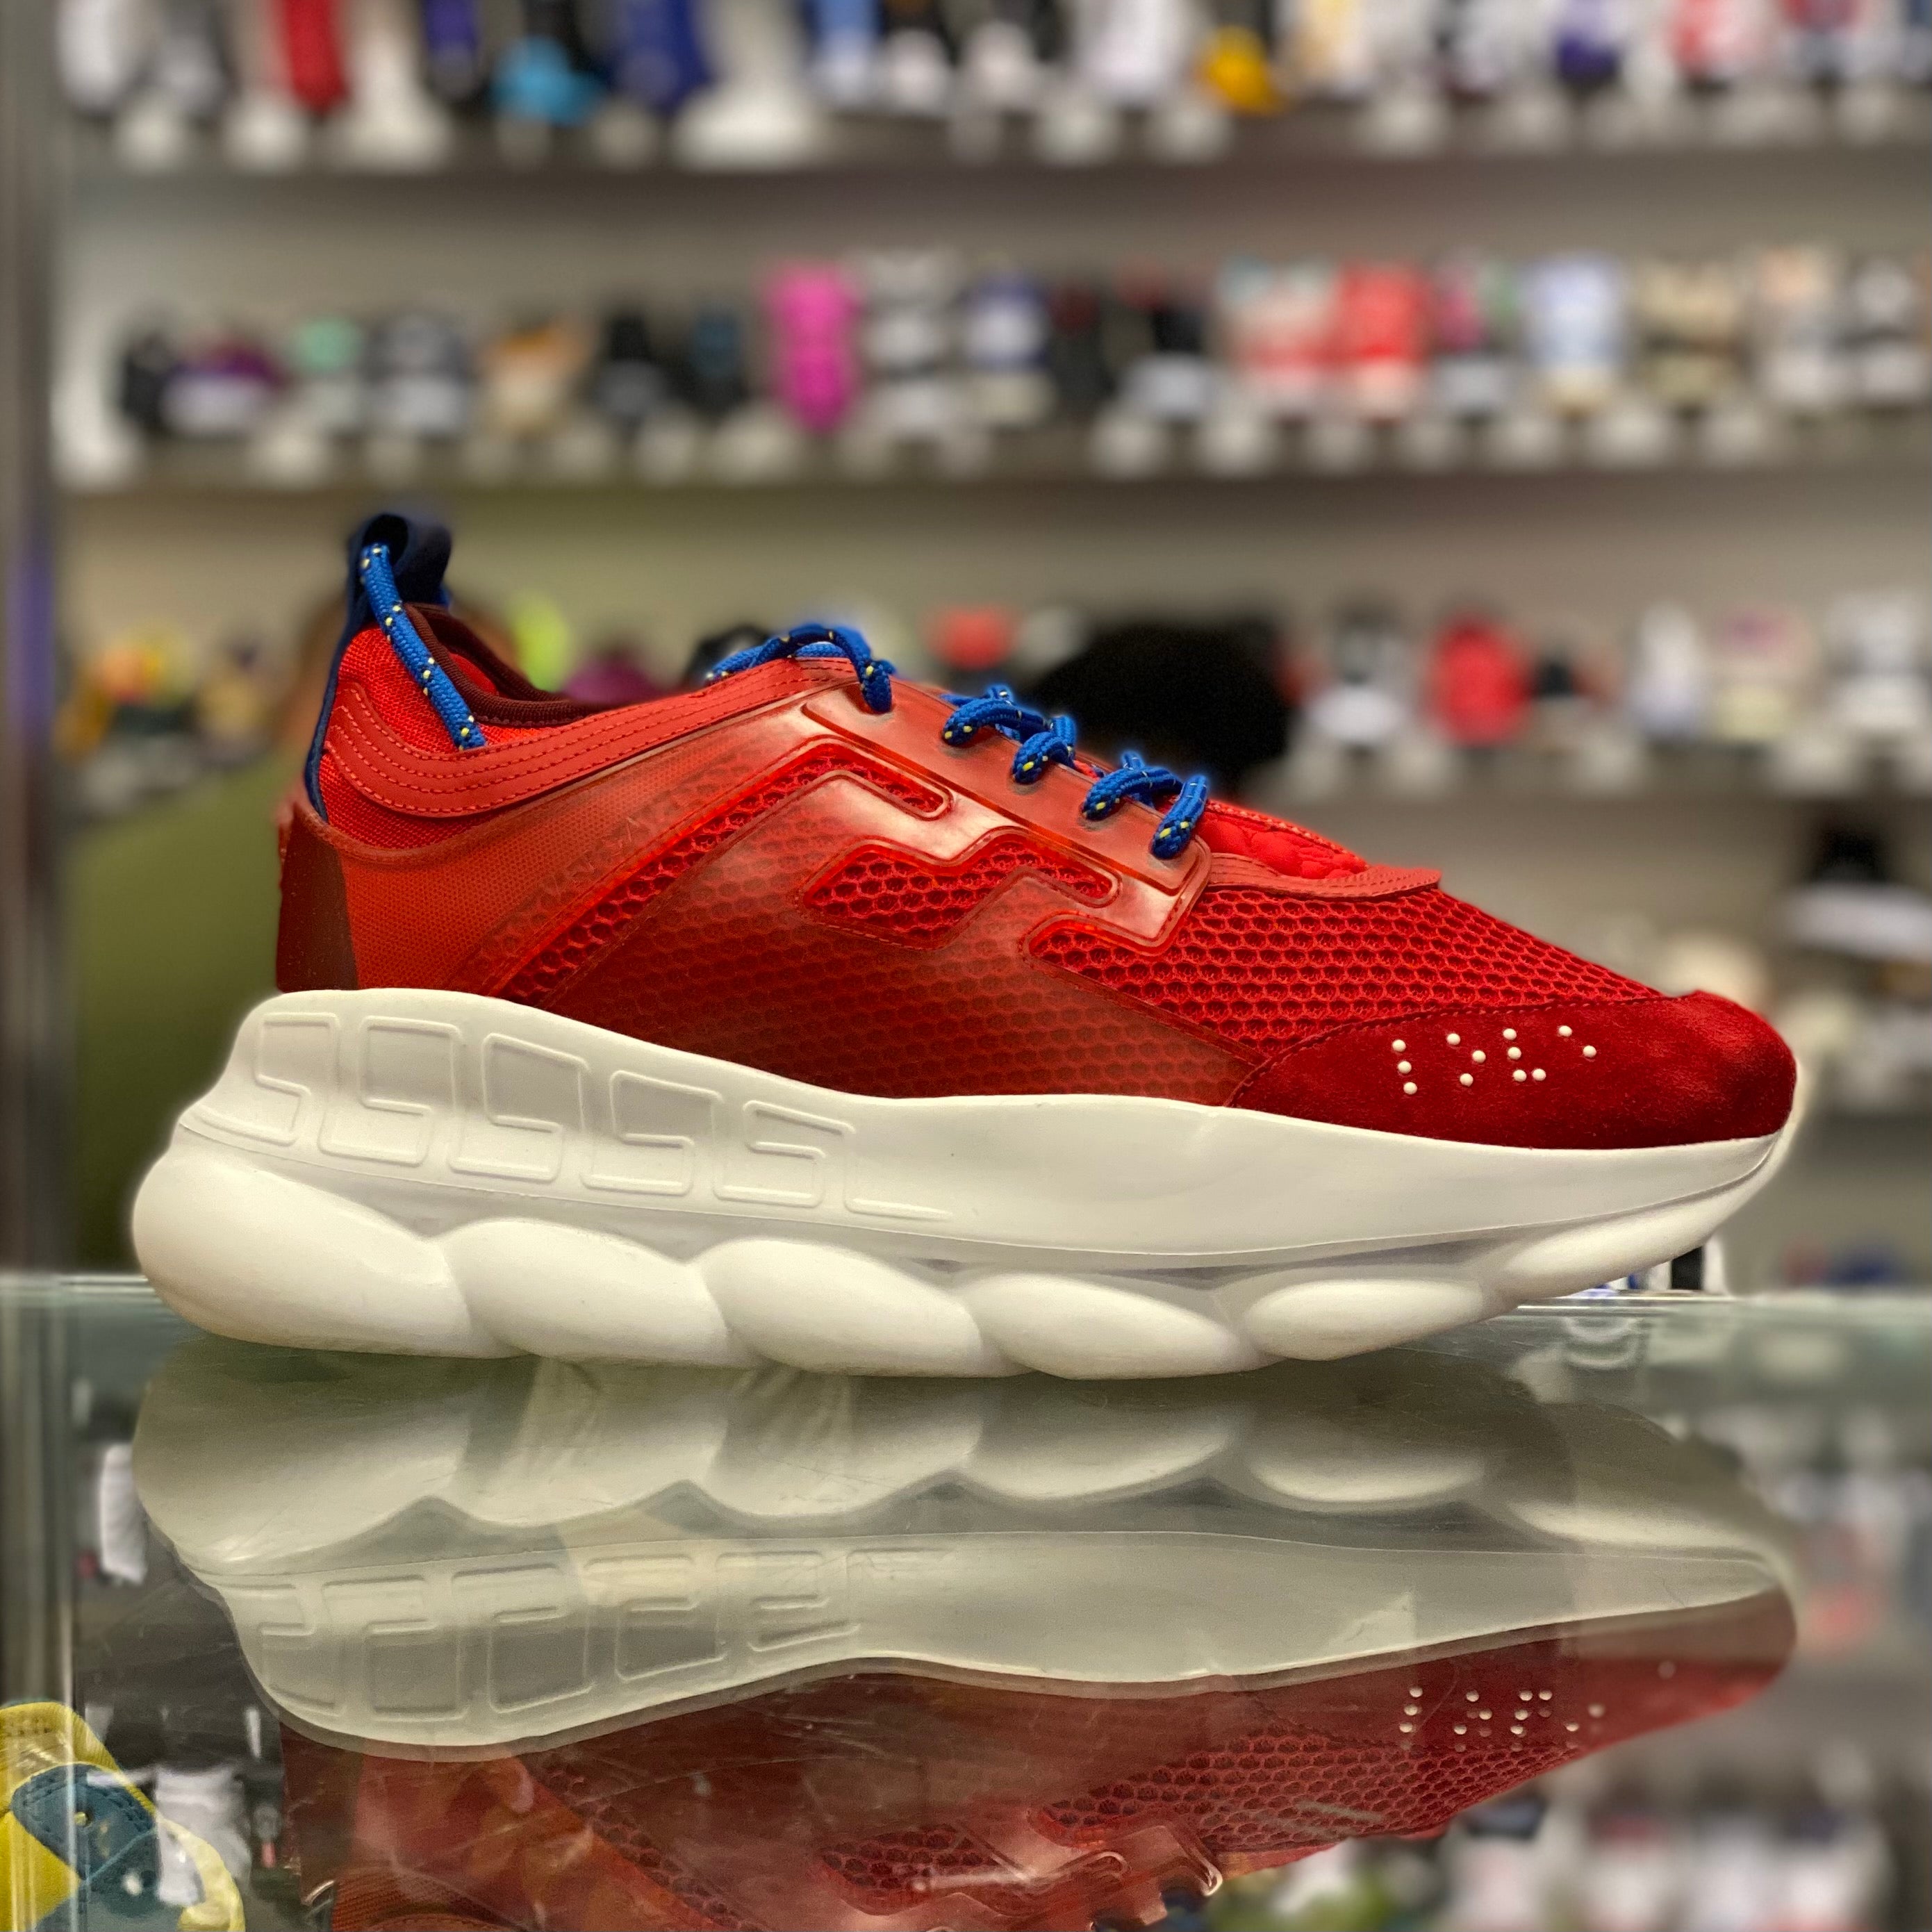 Versace Chain Reaction “2 Chainz Red”